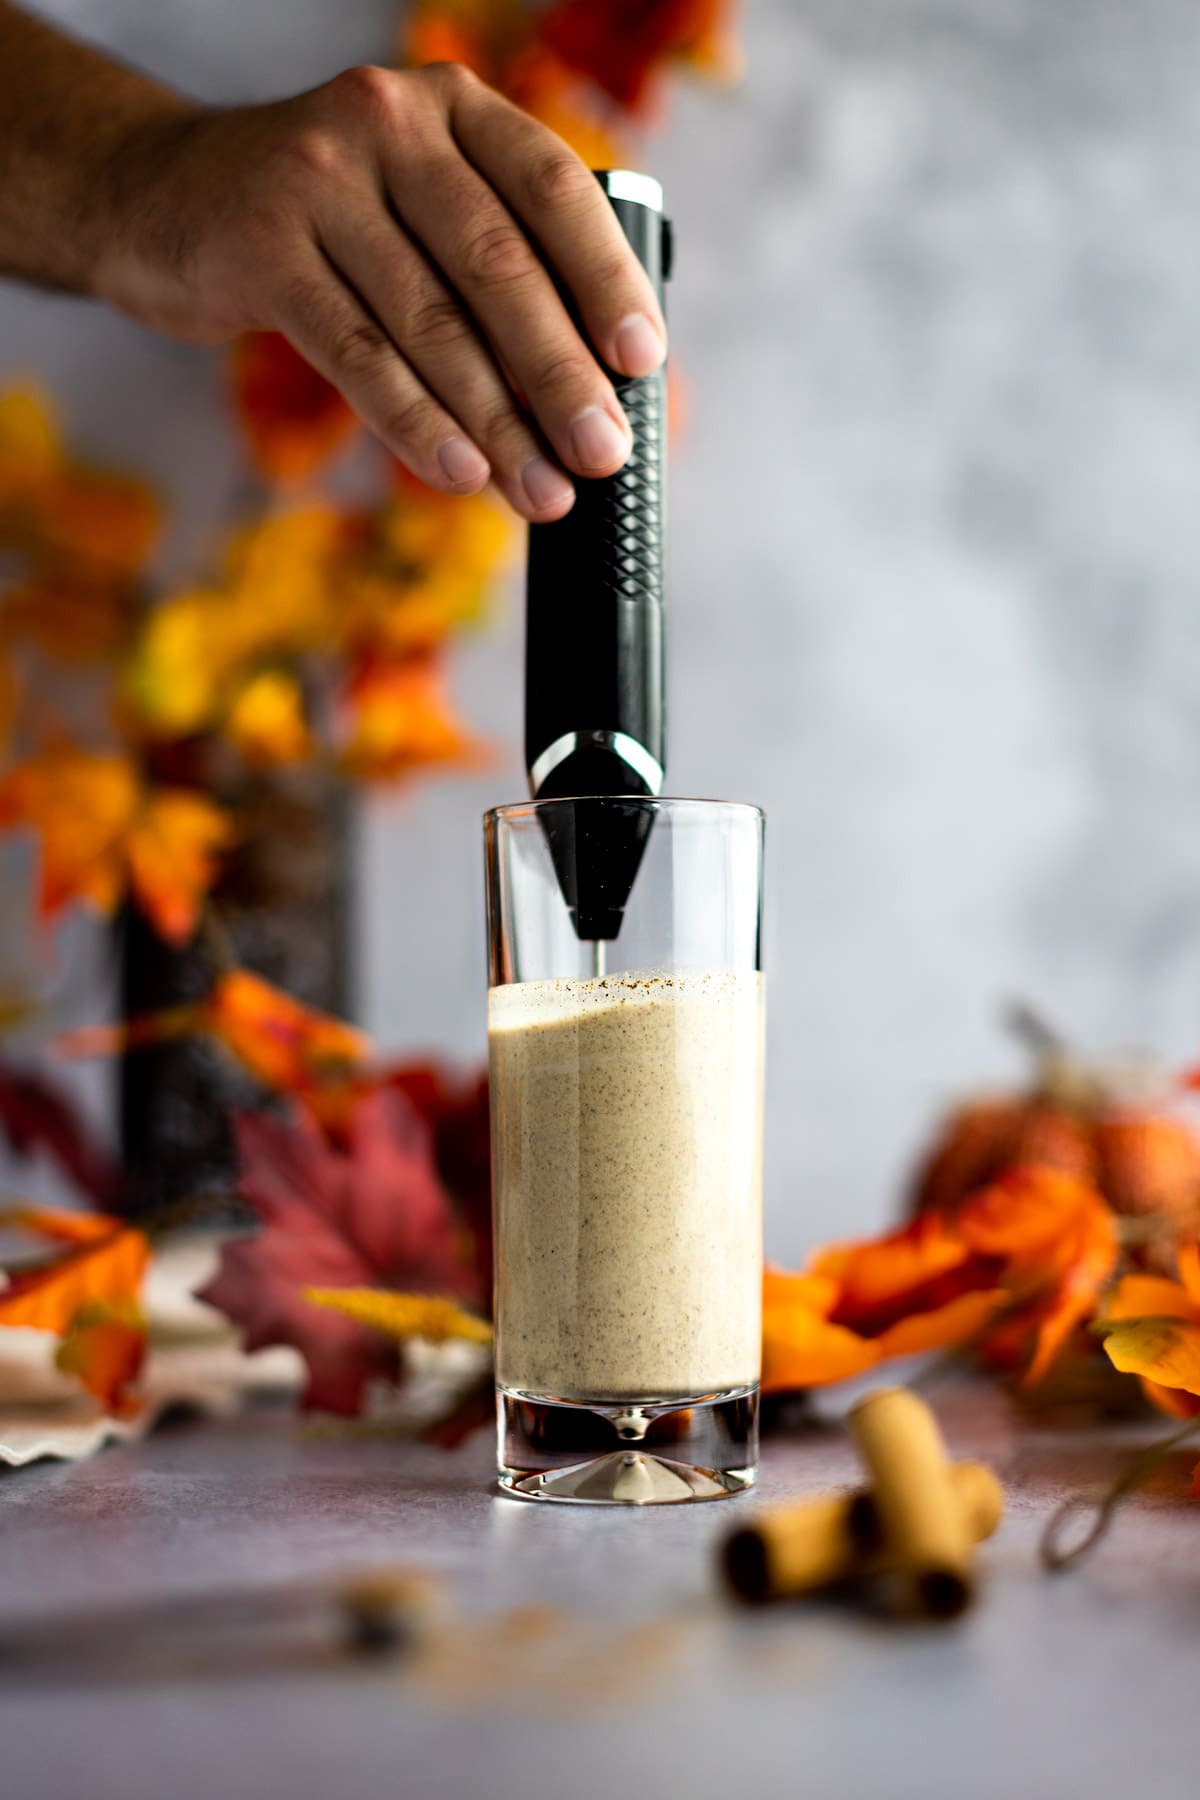 Hand holding a frother, blending the pumpkin foam in a tall, clear glass, with leaves in the background.